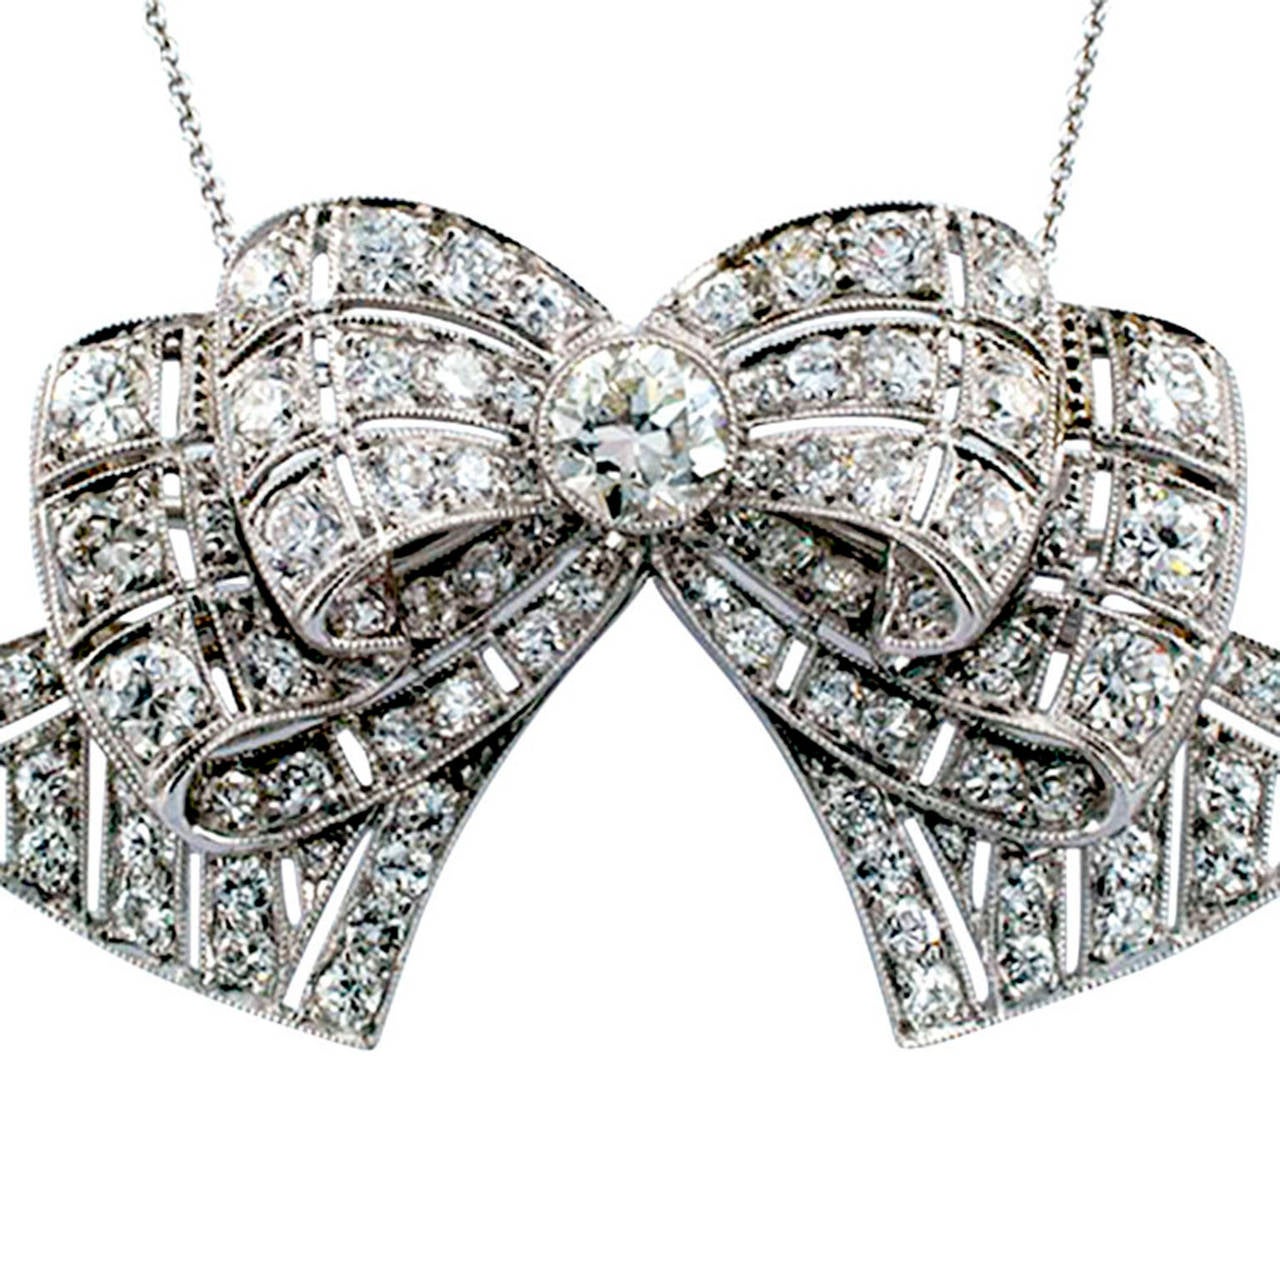 Art Deco brooch, circa 1925.  Combining opulence and grace, the double bow design is knotted by a single larger diamond.  With open work and milegrain design, sparkling ribbons are set with smaller diamonds.  Eighty-nine fine diamonds in all,